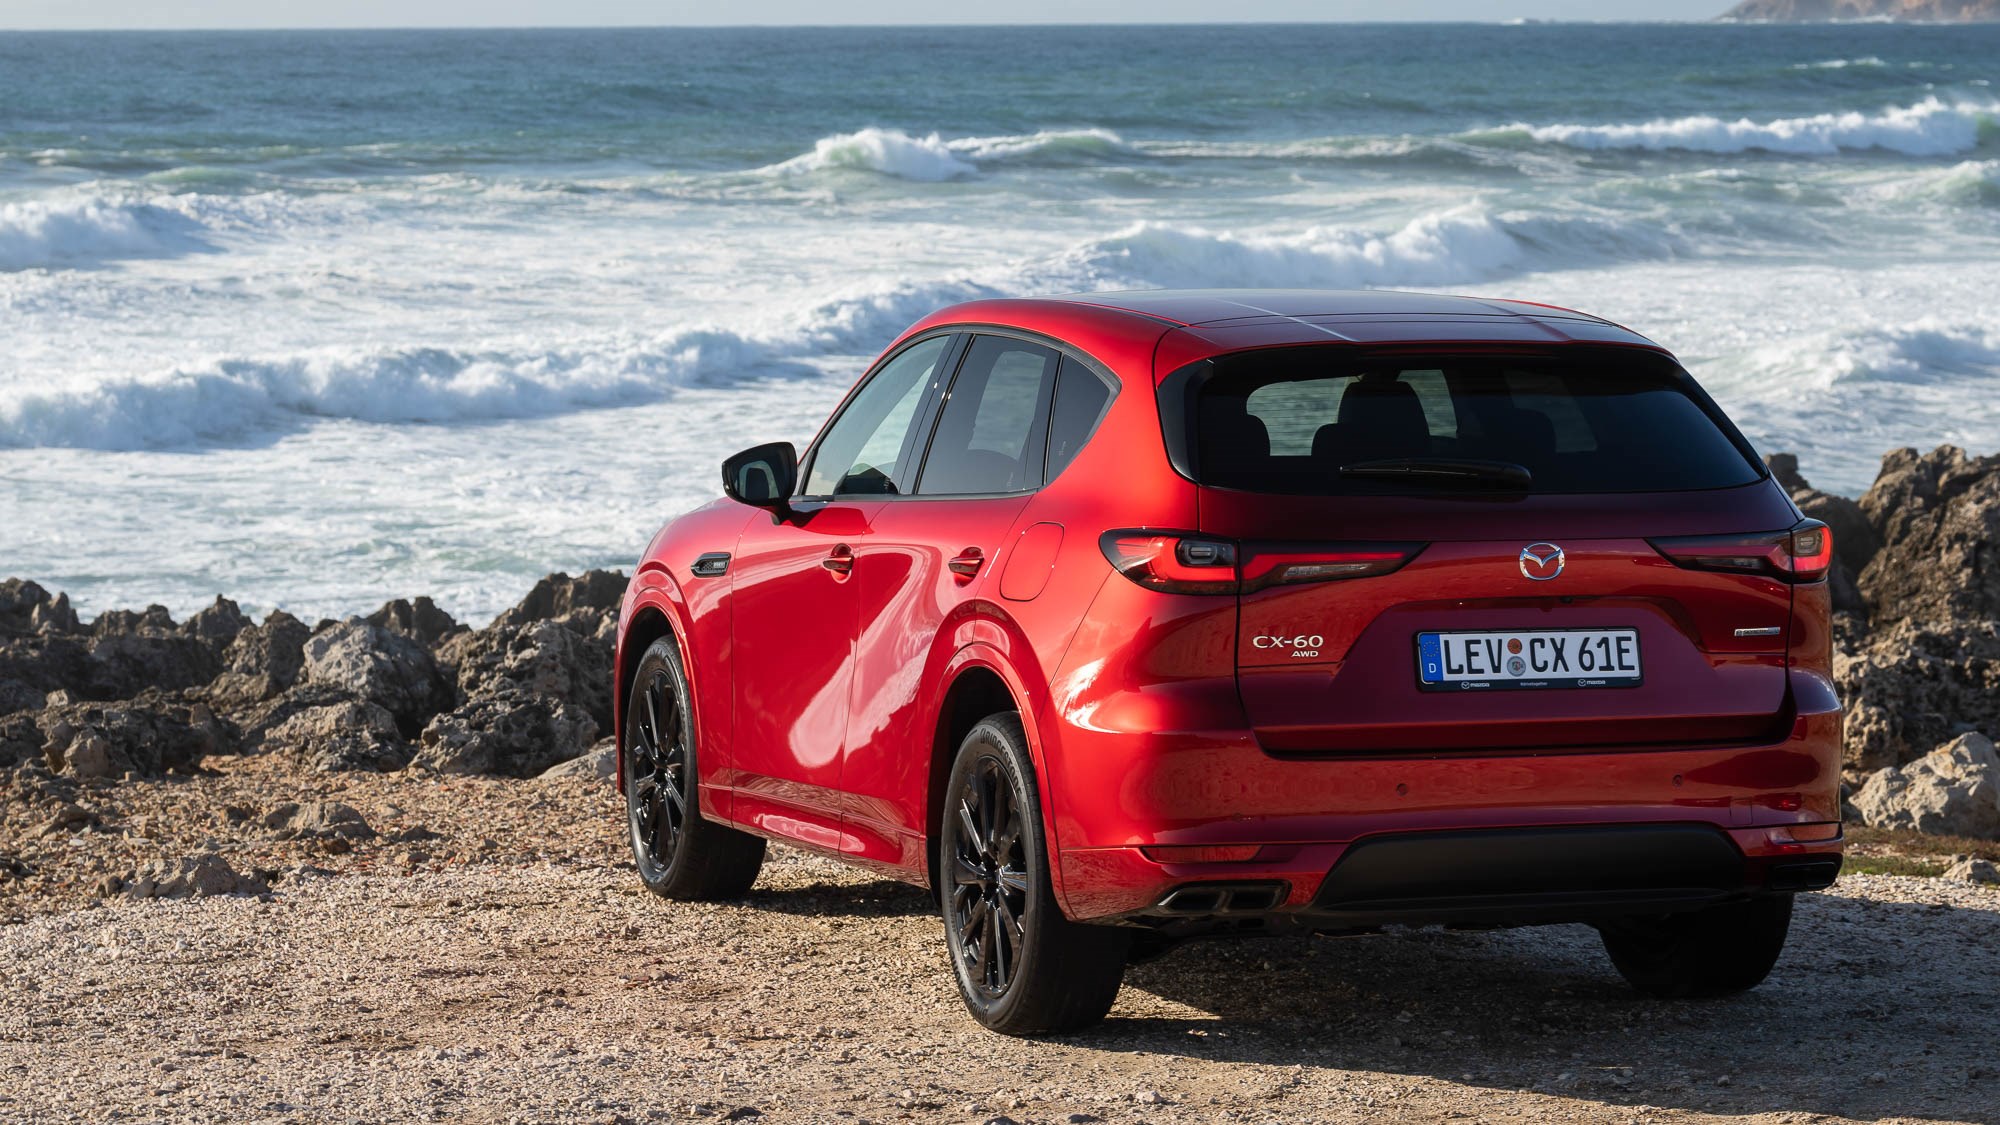 Mazda CX-60 review - rear view, Soul Red